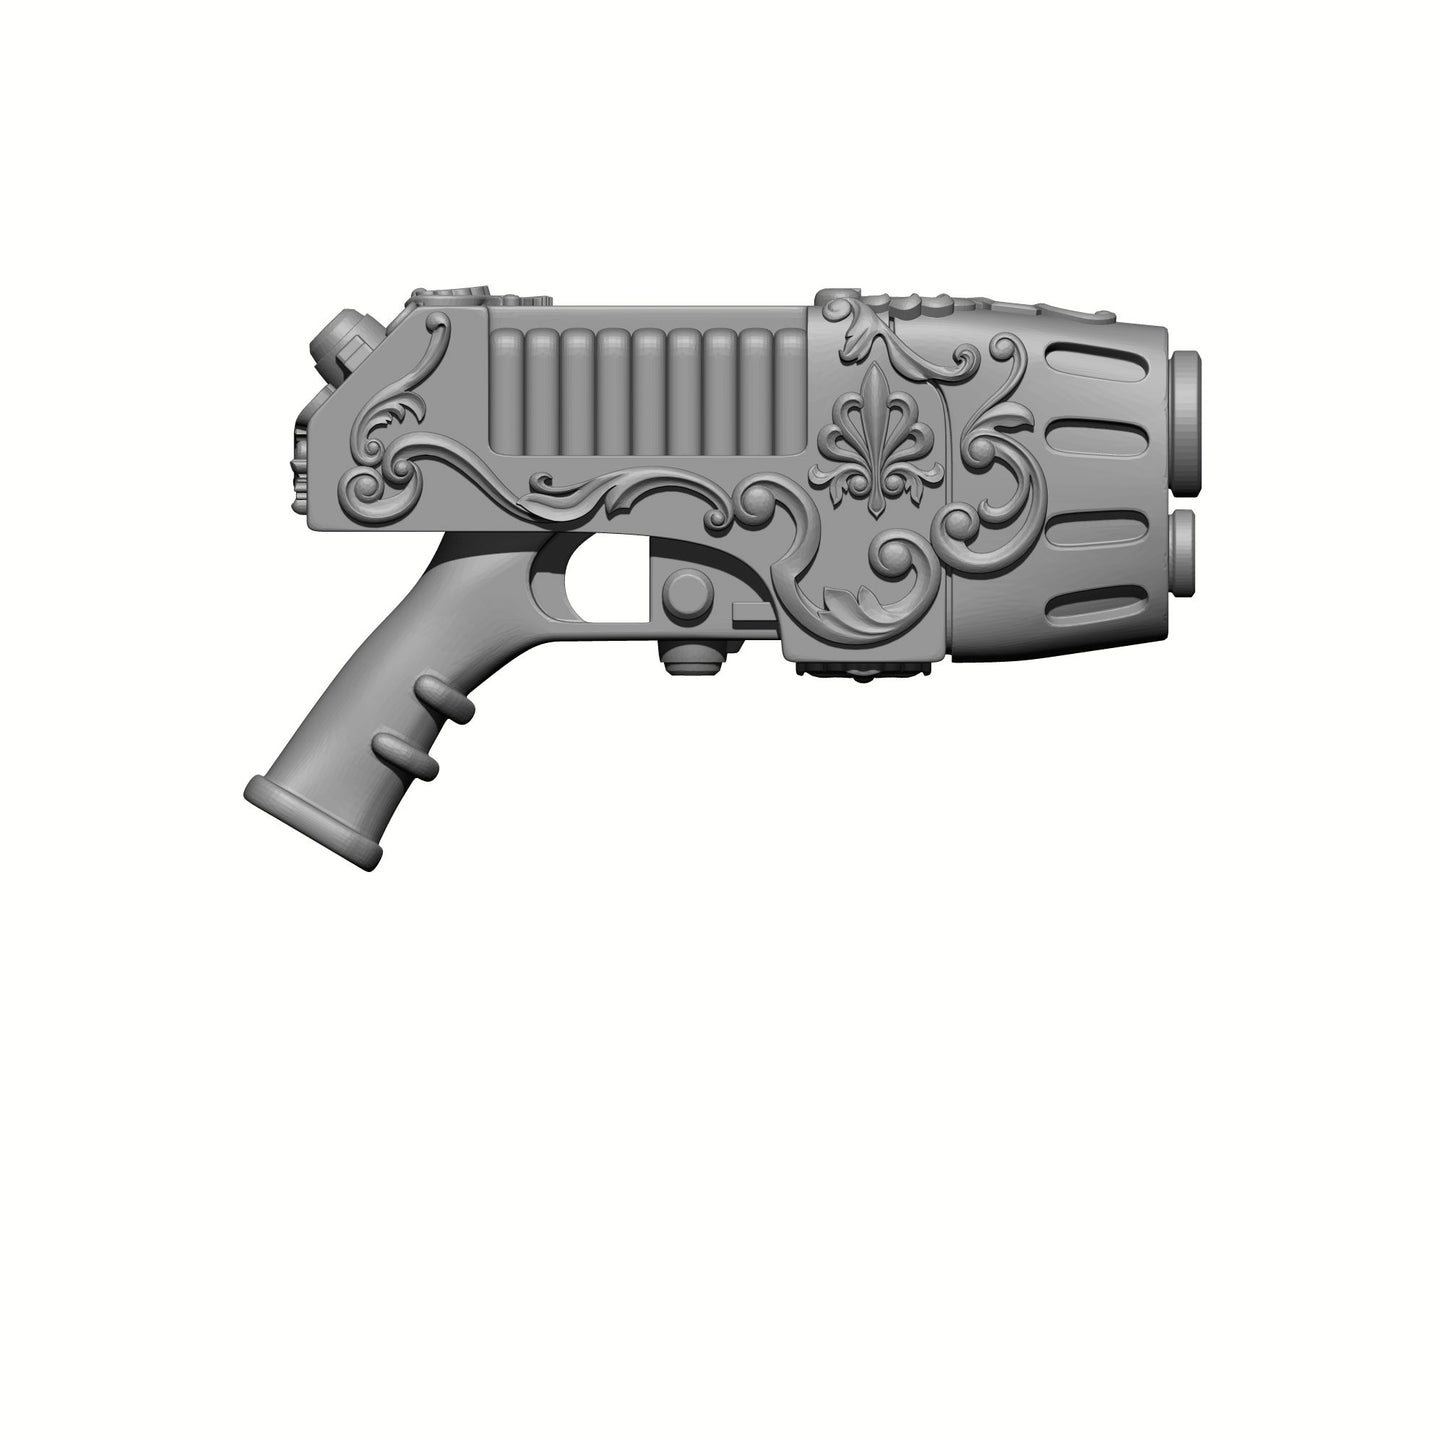  Los Muertos Chapter Artificer Pattern Plasma Gun compatible with JoyToy Space Marine Action Figures by 18th Scale Armory